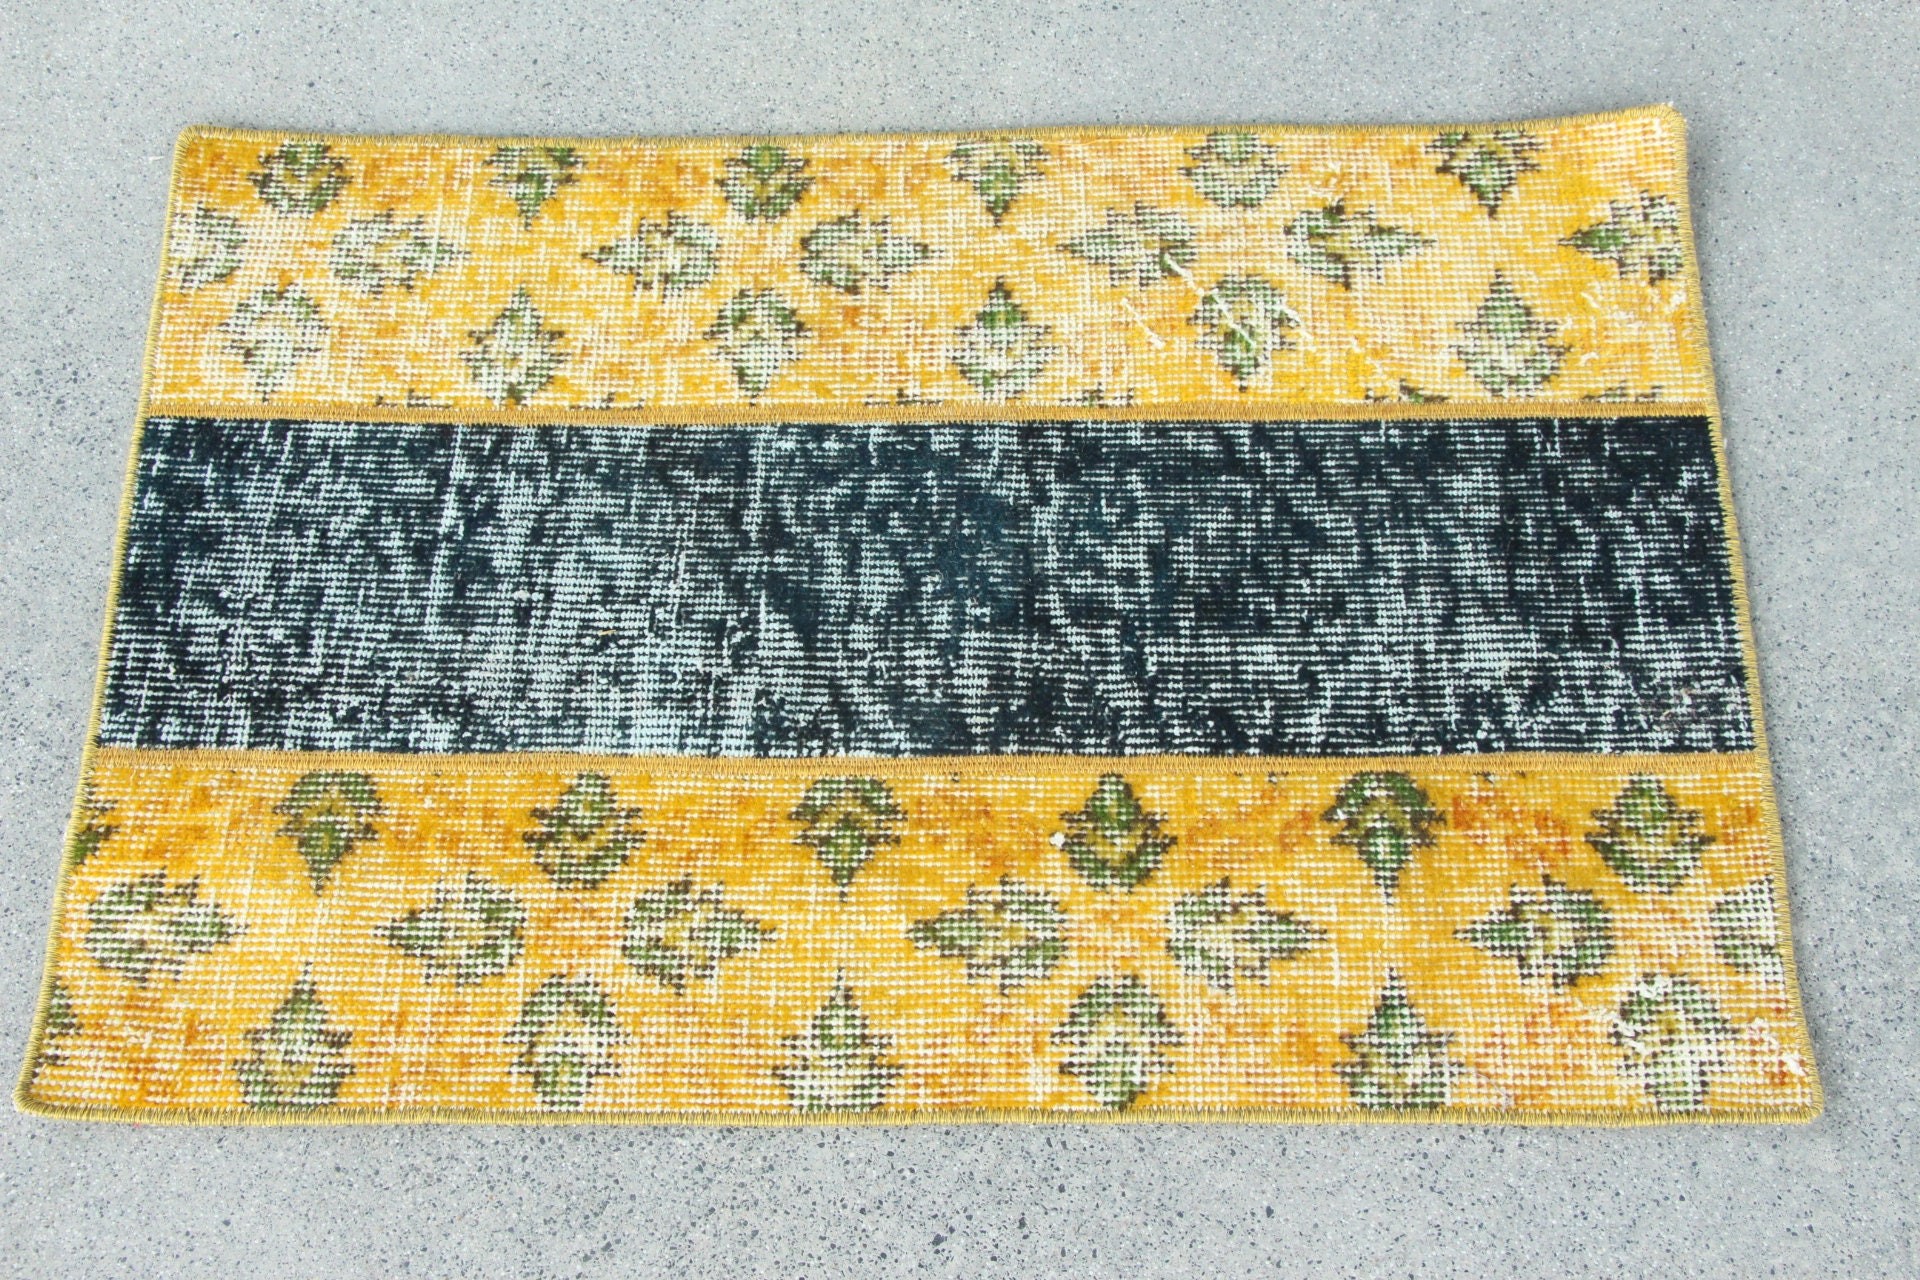 Antique Rugs, Turkish Rugs, Vintage Rugs, Entry Rug, Yellow Home Decor Rugs, Anatolian Rugs, Retro Rug, Bedroom Rugs, 1.8x2.7 ft Small Rugs